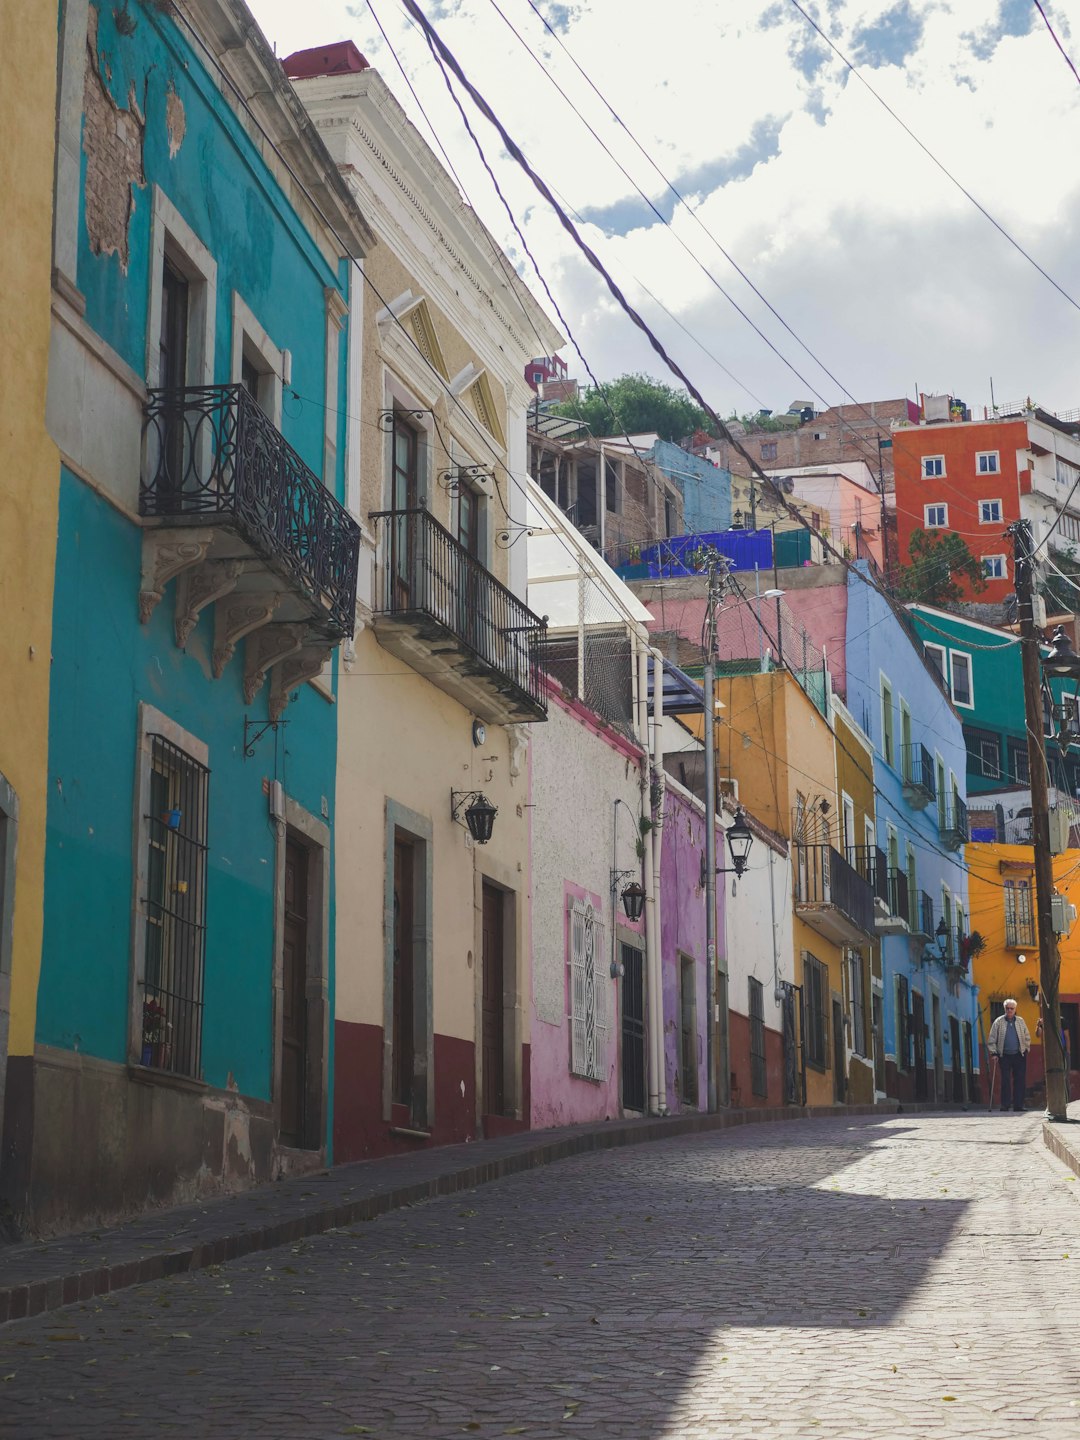 Travel Tips and Stories of Guanajuato in Mexico